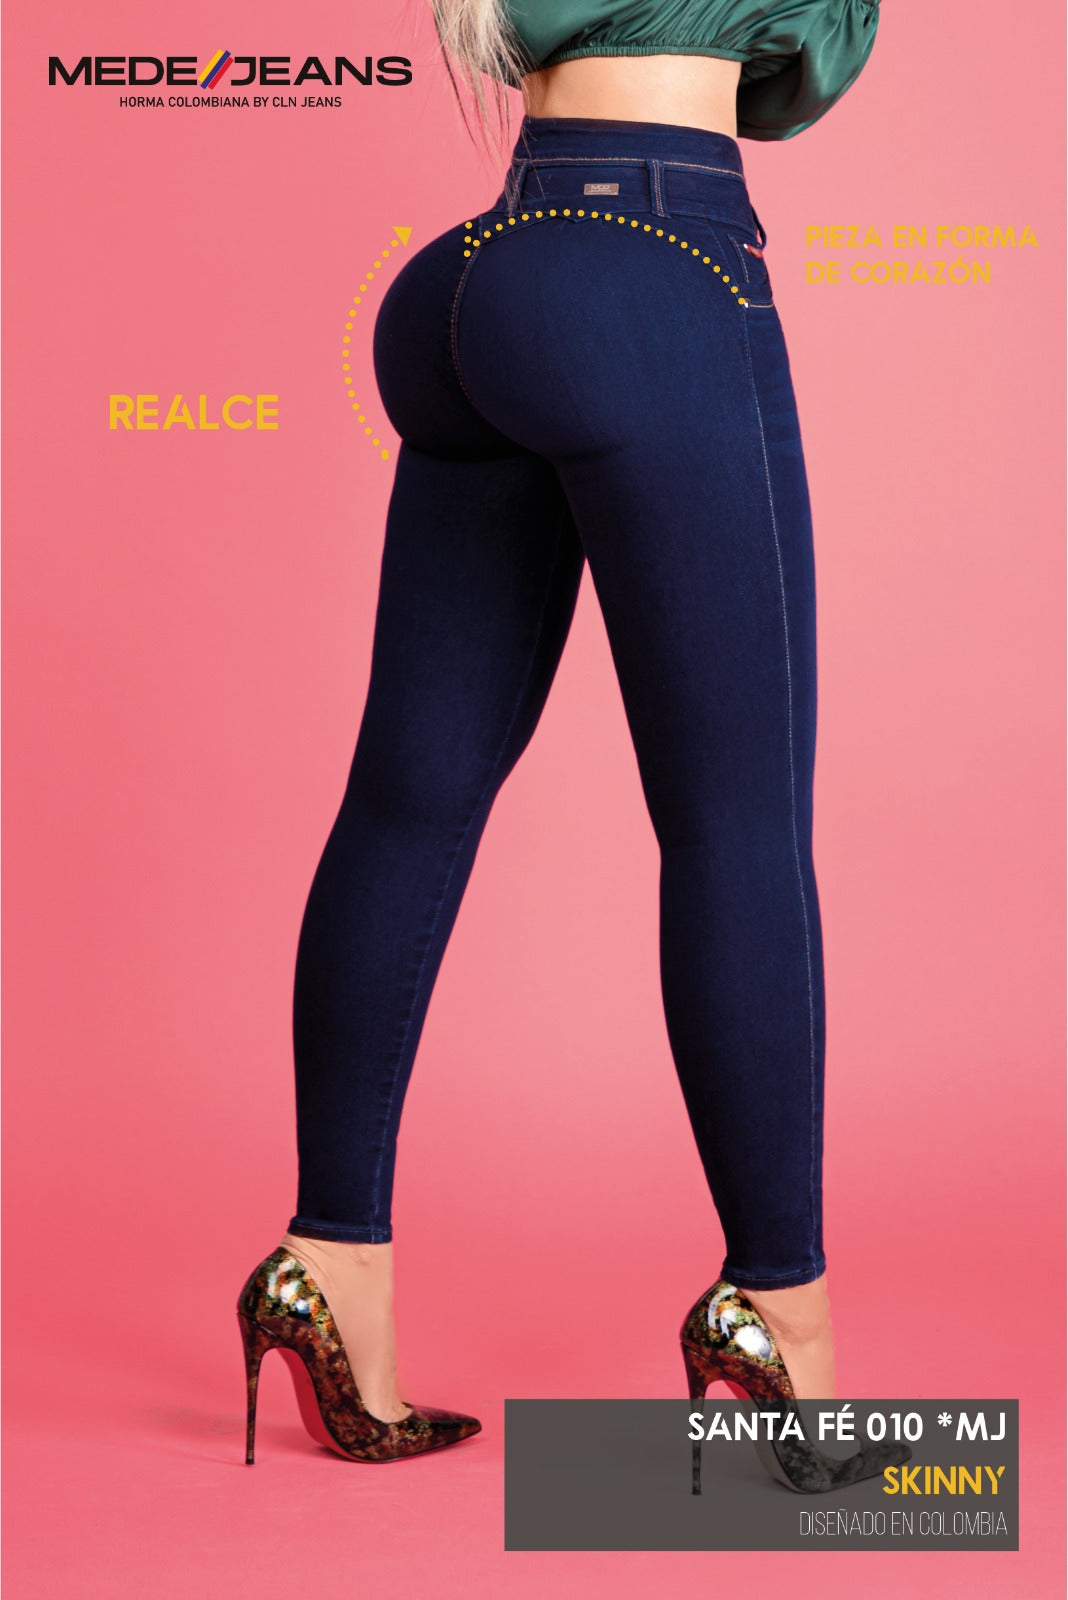 Mede jeans colombianos MD010 – Atrevete Jeans